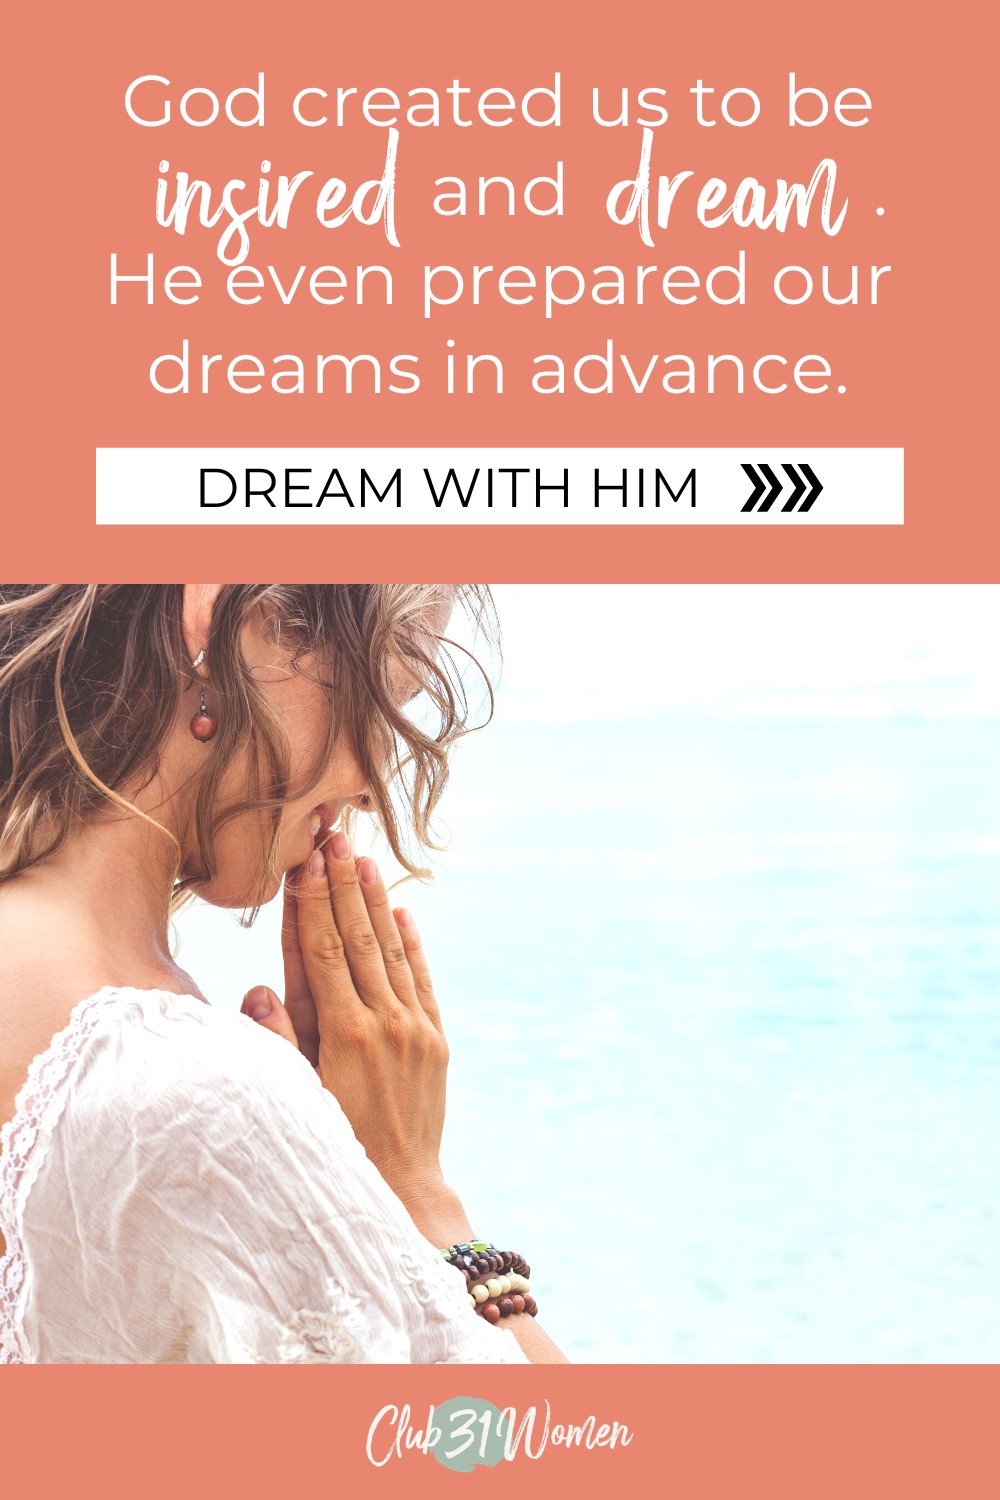 Have You Shared Your Innermost Dreams and Goals with God? via @Club31Women